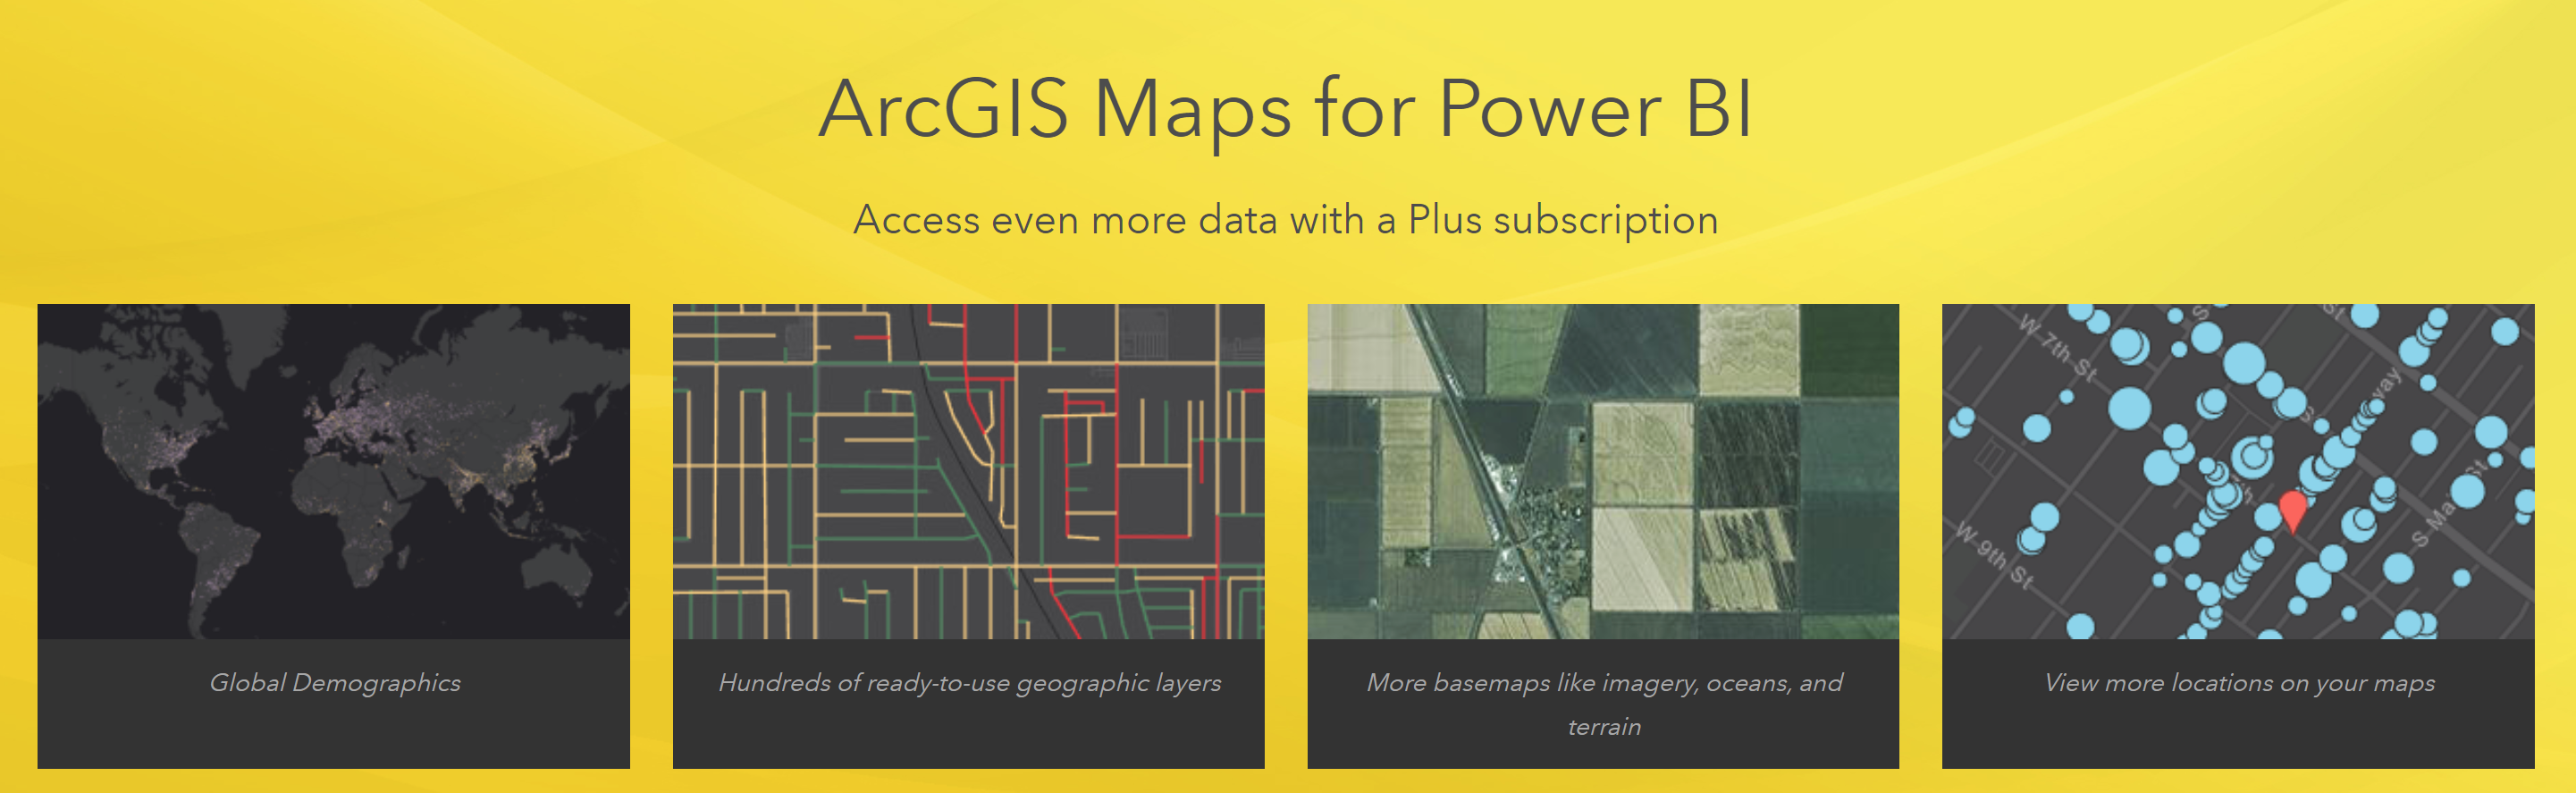 Images showing features of the Plus subscription